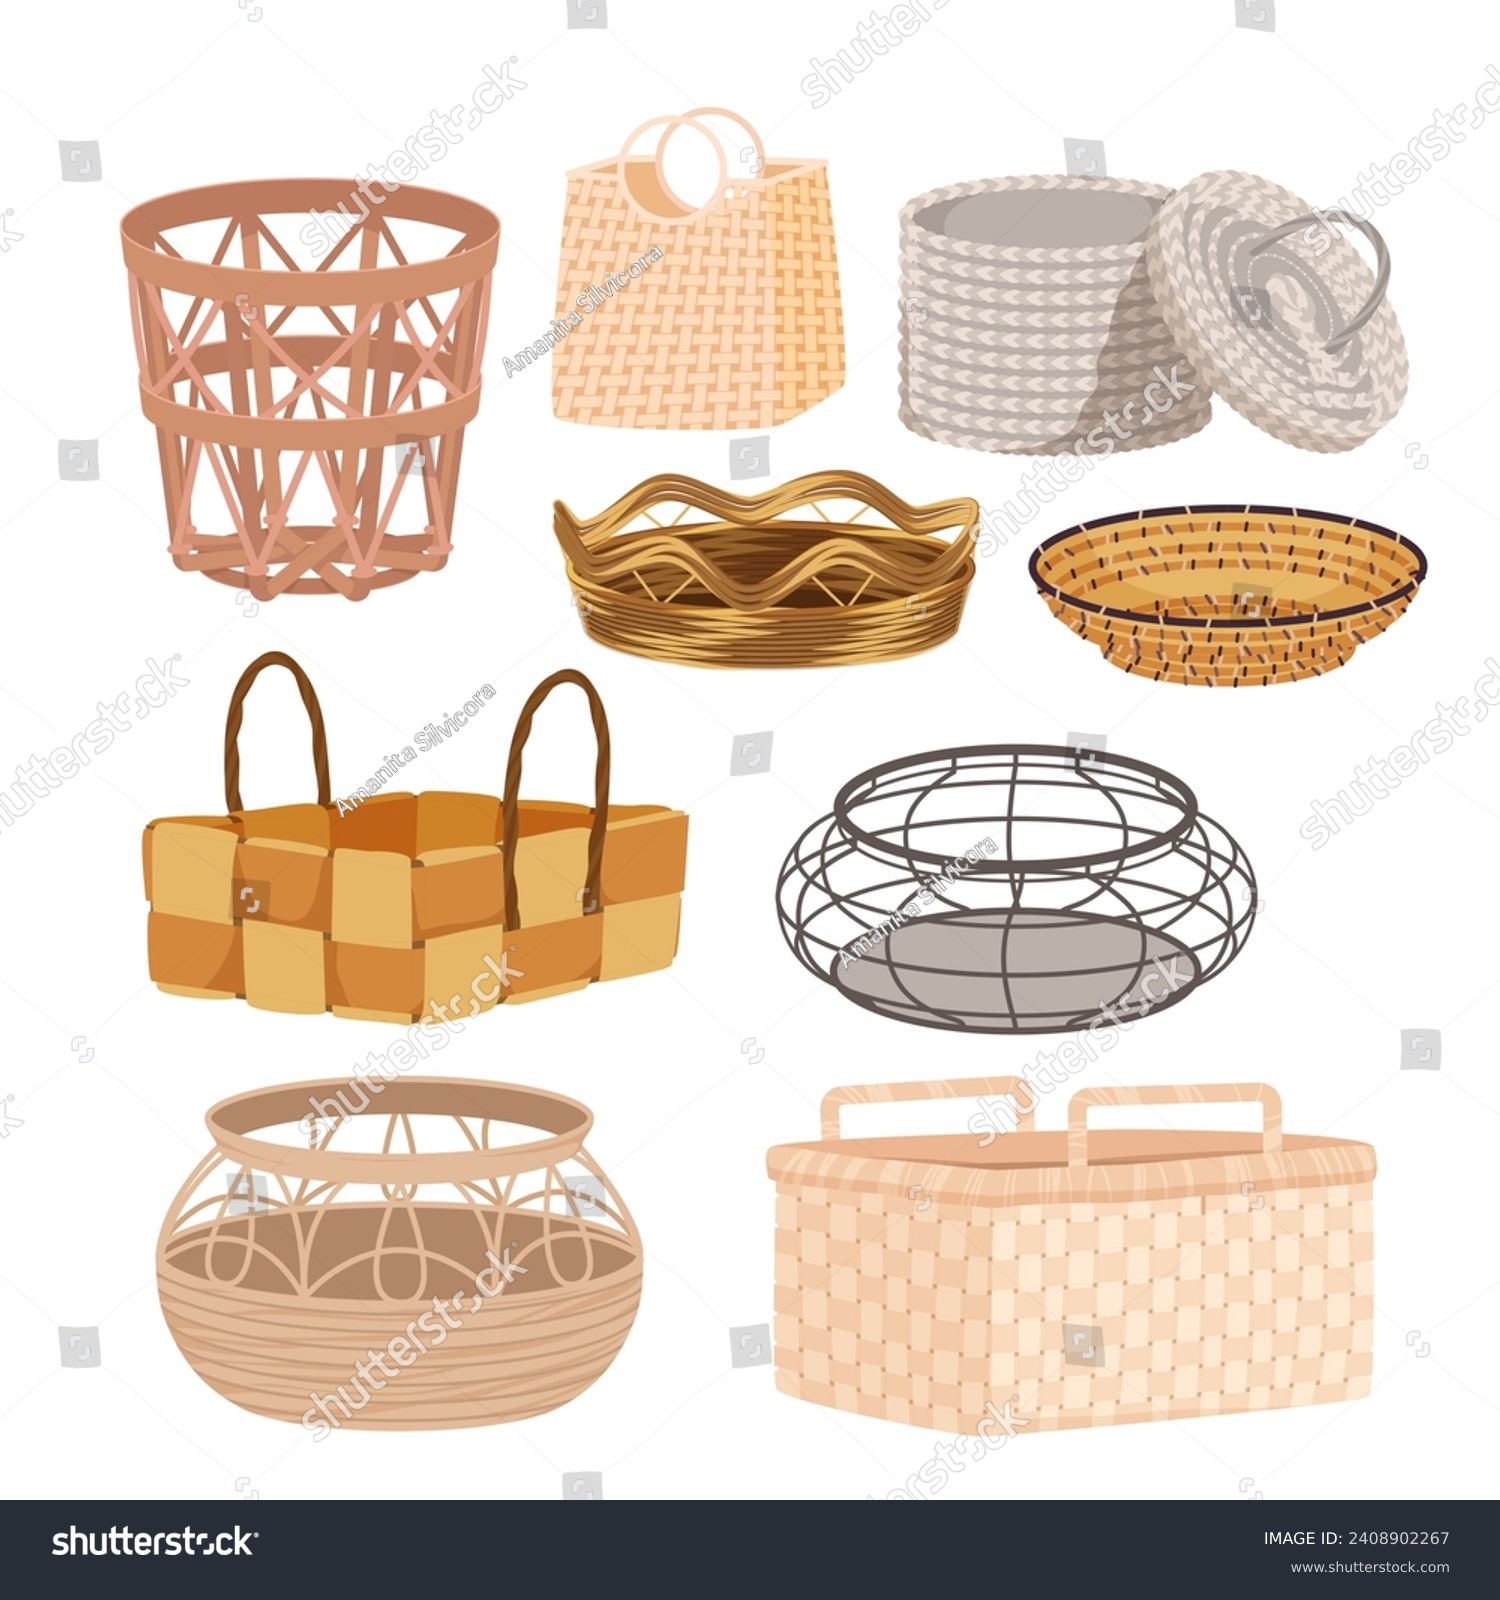 SVG of Baskets set vector illustration. Cartoon isolated round and square baskets with lid and handles, empty wicker bin for furniture, laundry and storage, rattan and fabric, bamboo and wooden hampers svg